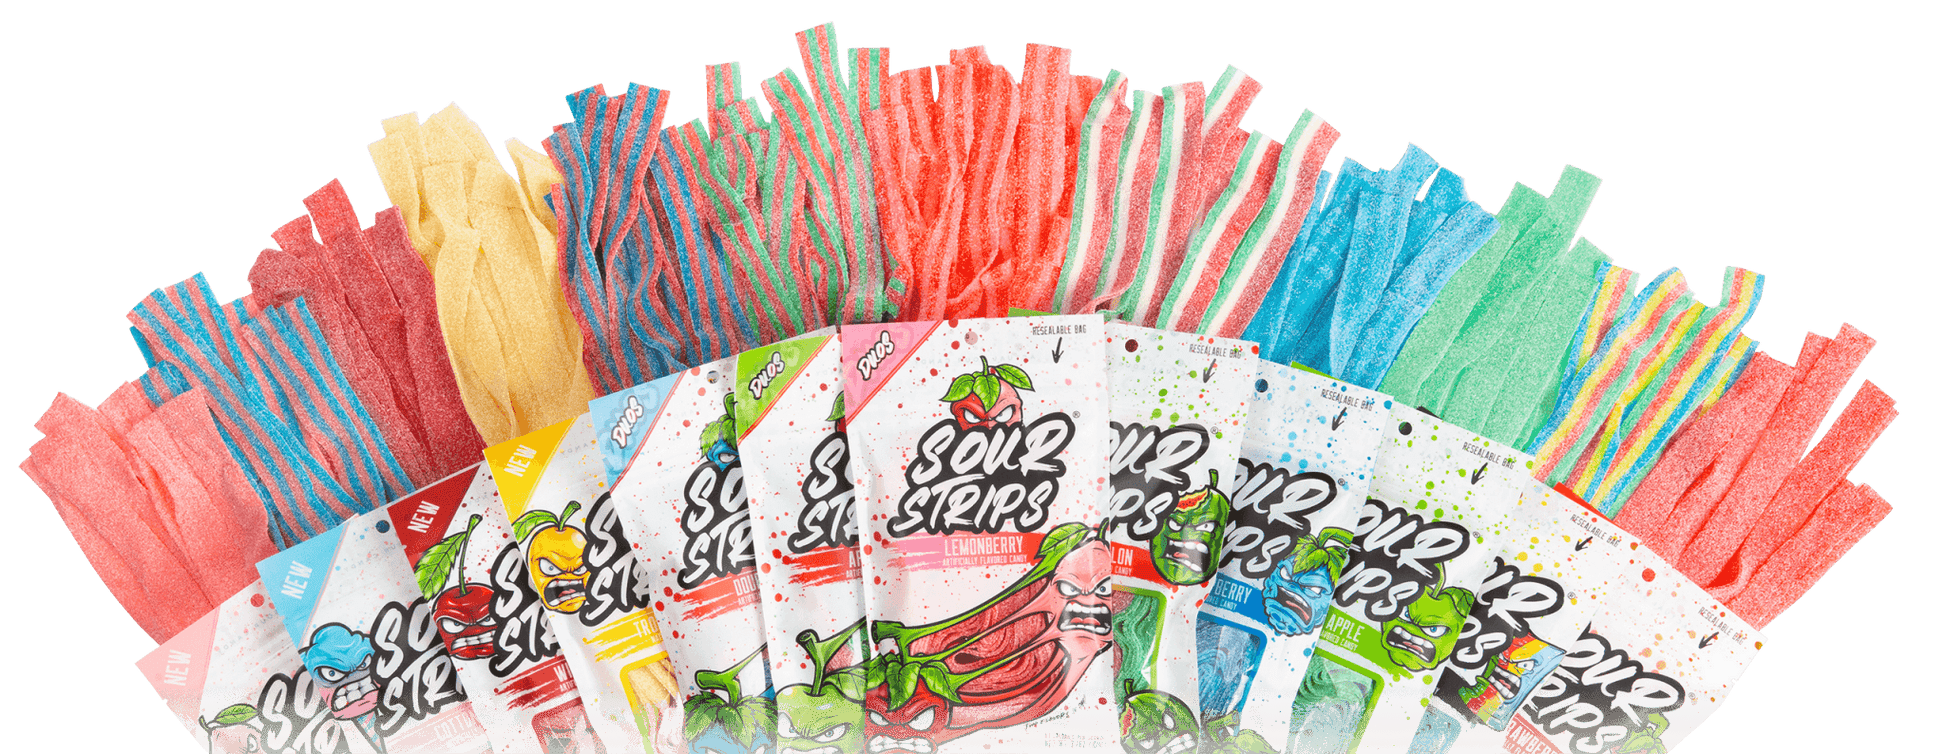 Sour Strips - Strawberry - Thurgood’s Goods